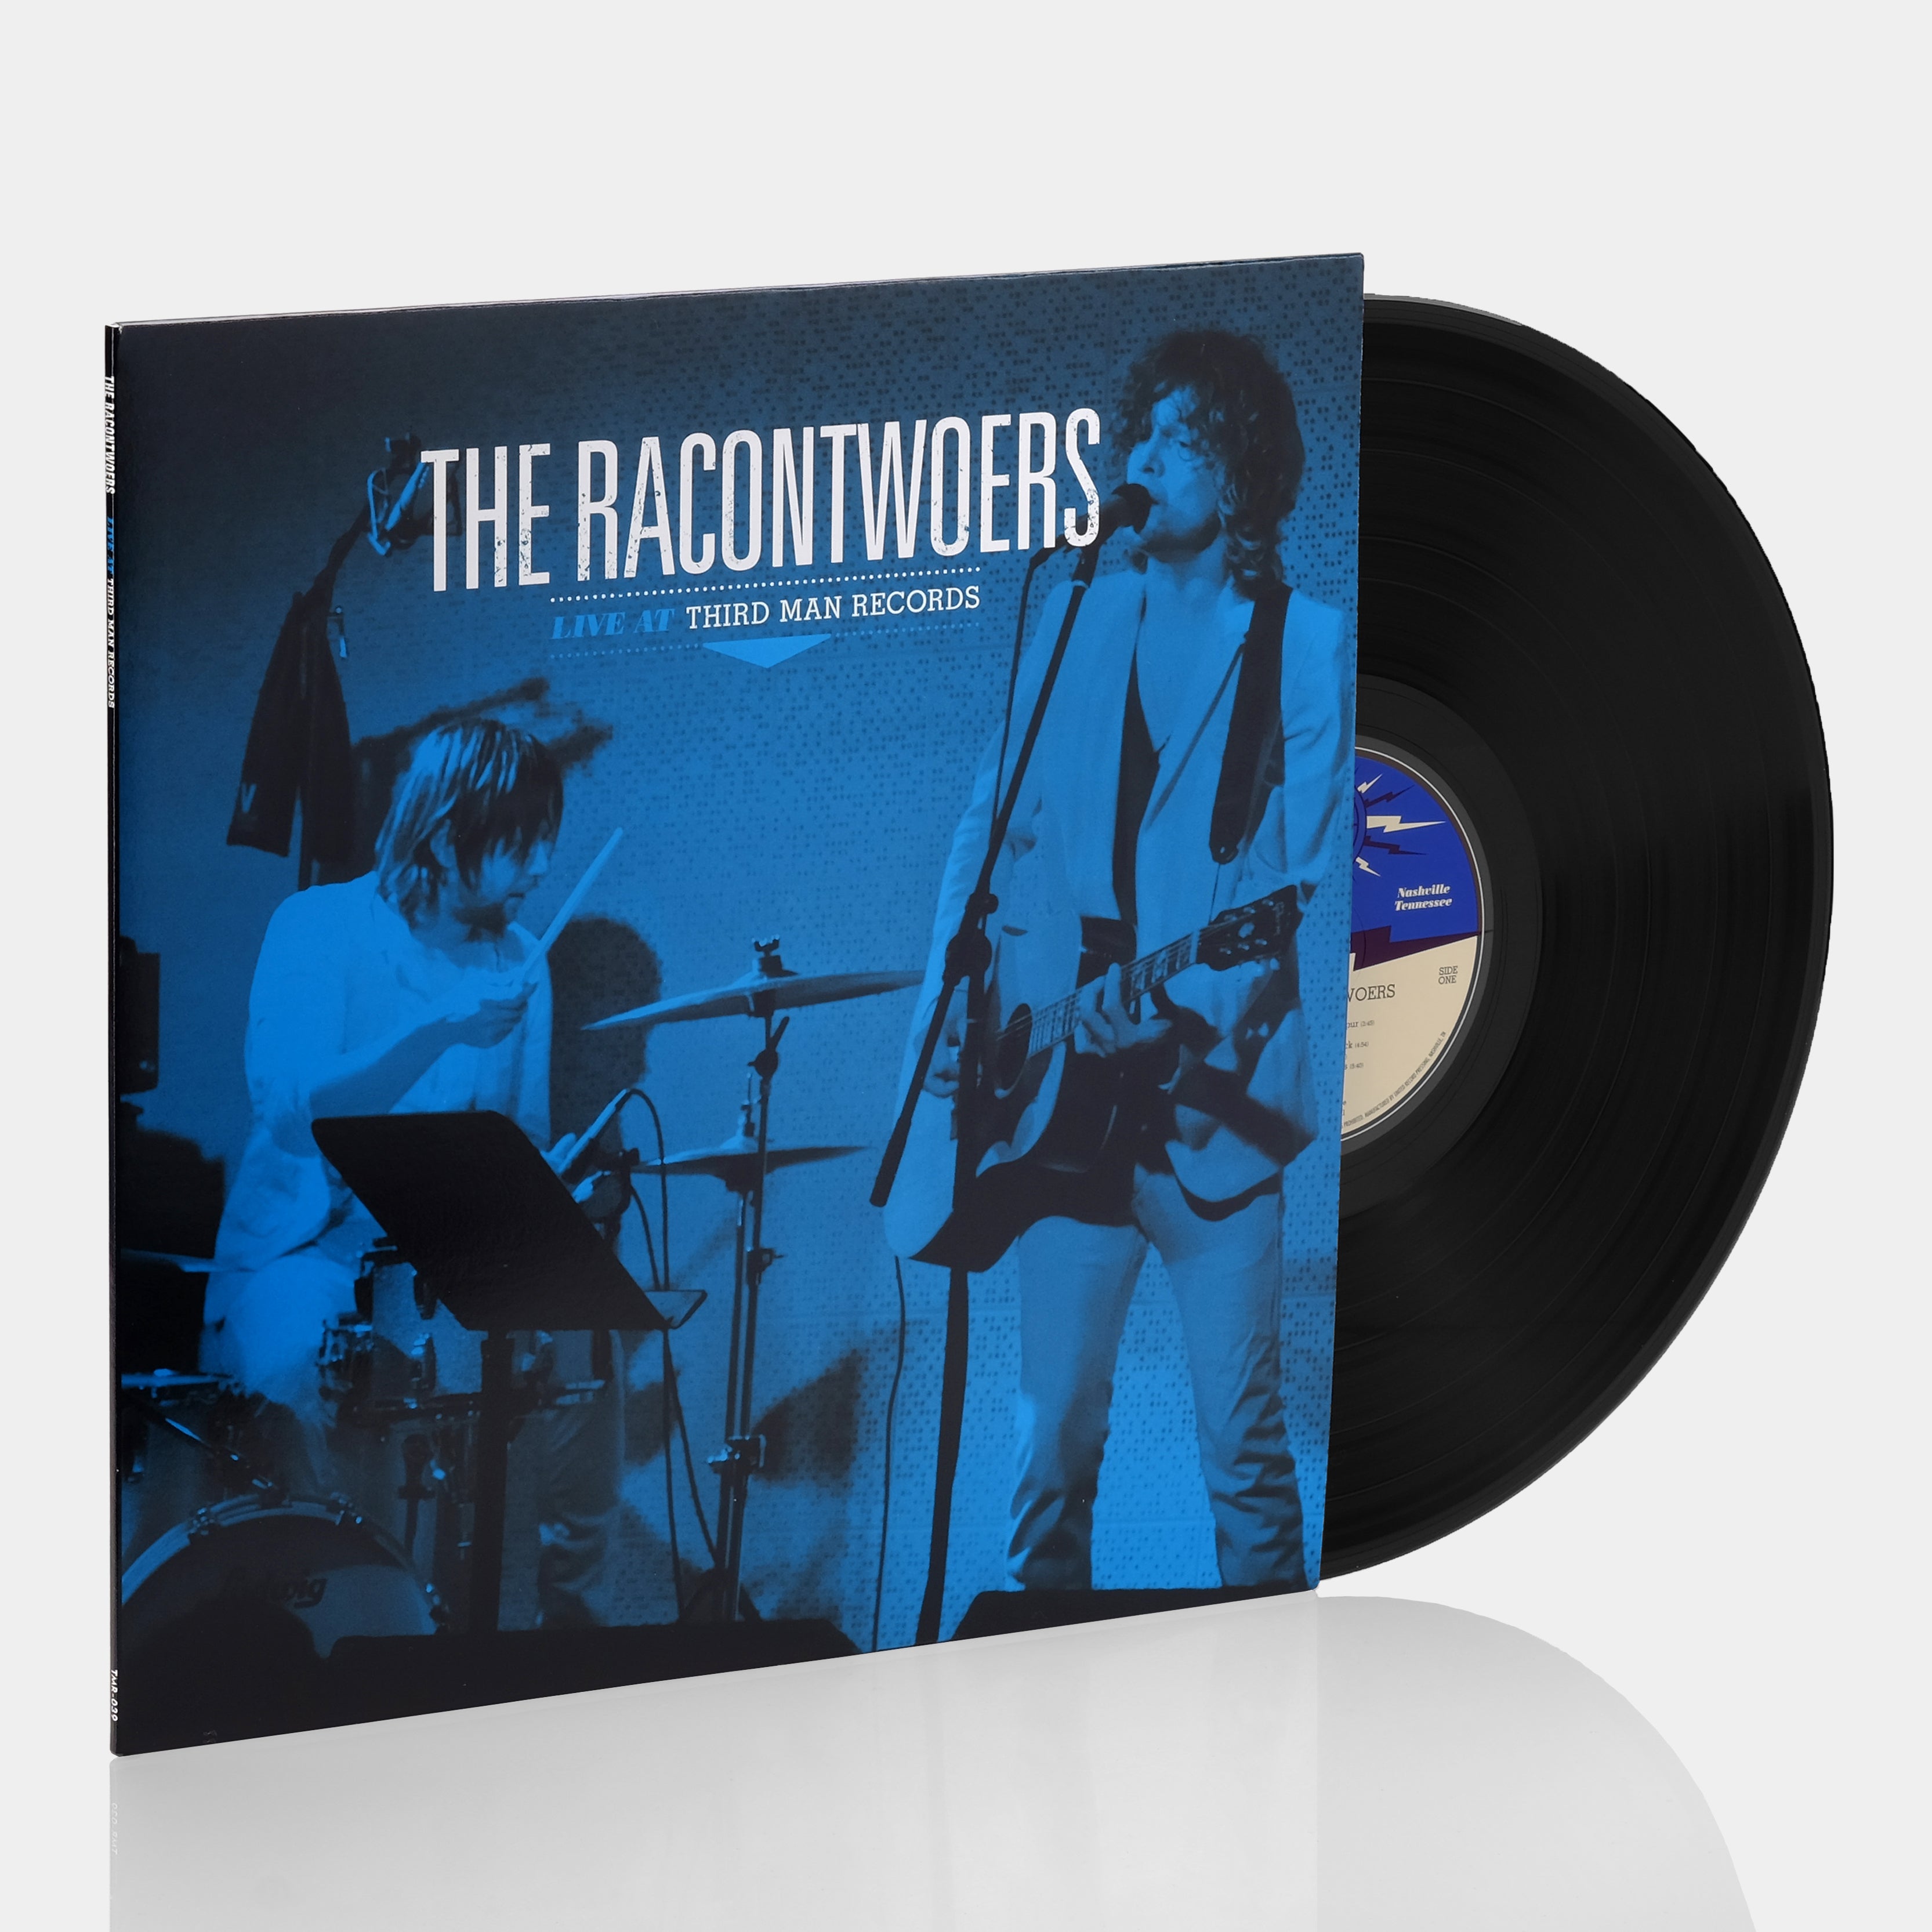 The Racontwoers - Live At Third Man Records LP Vinyl Record